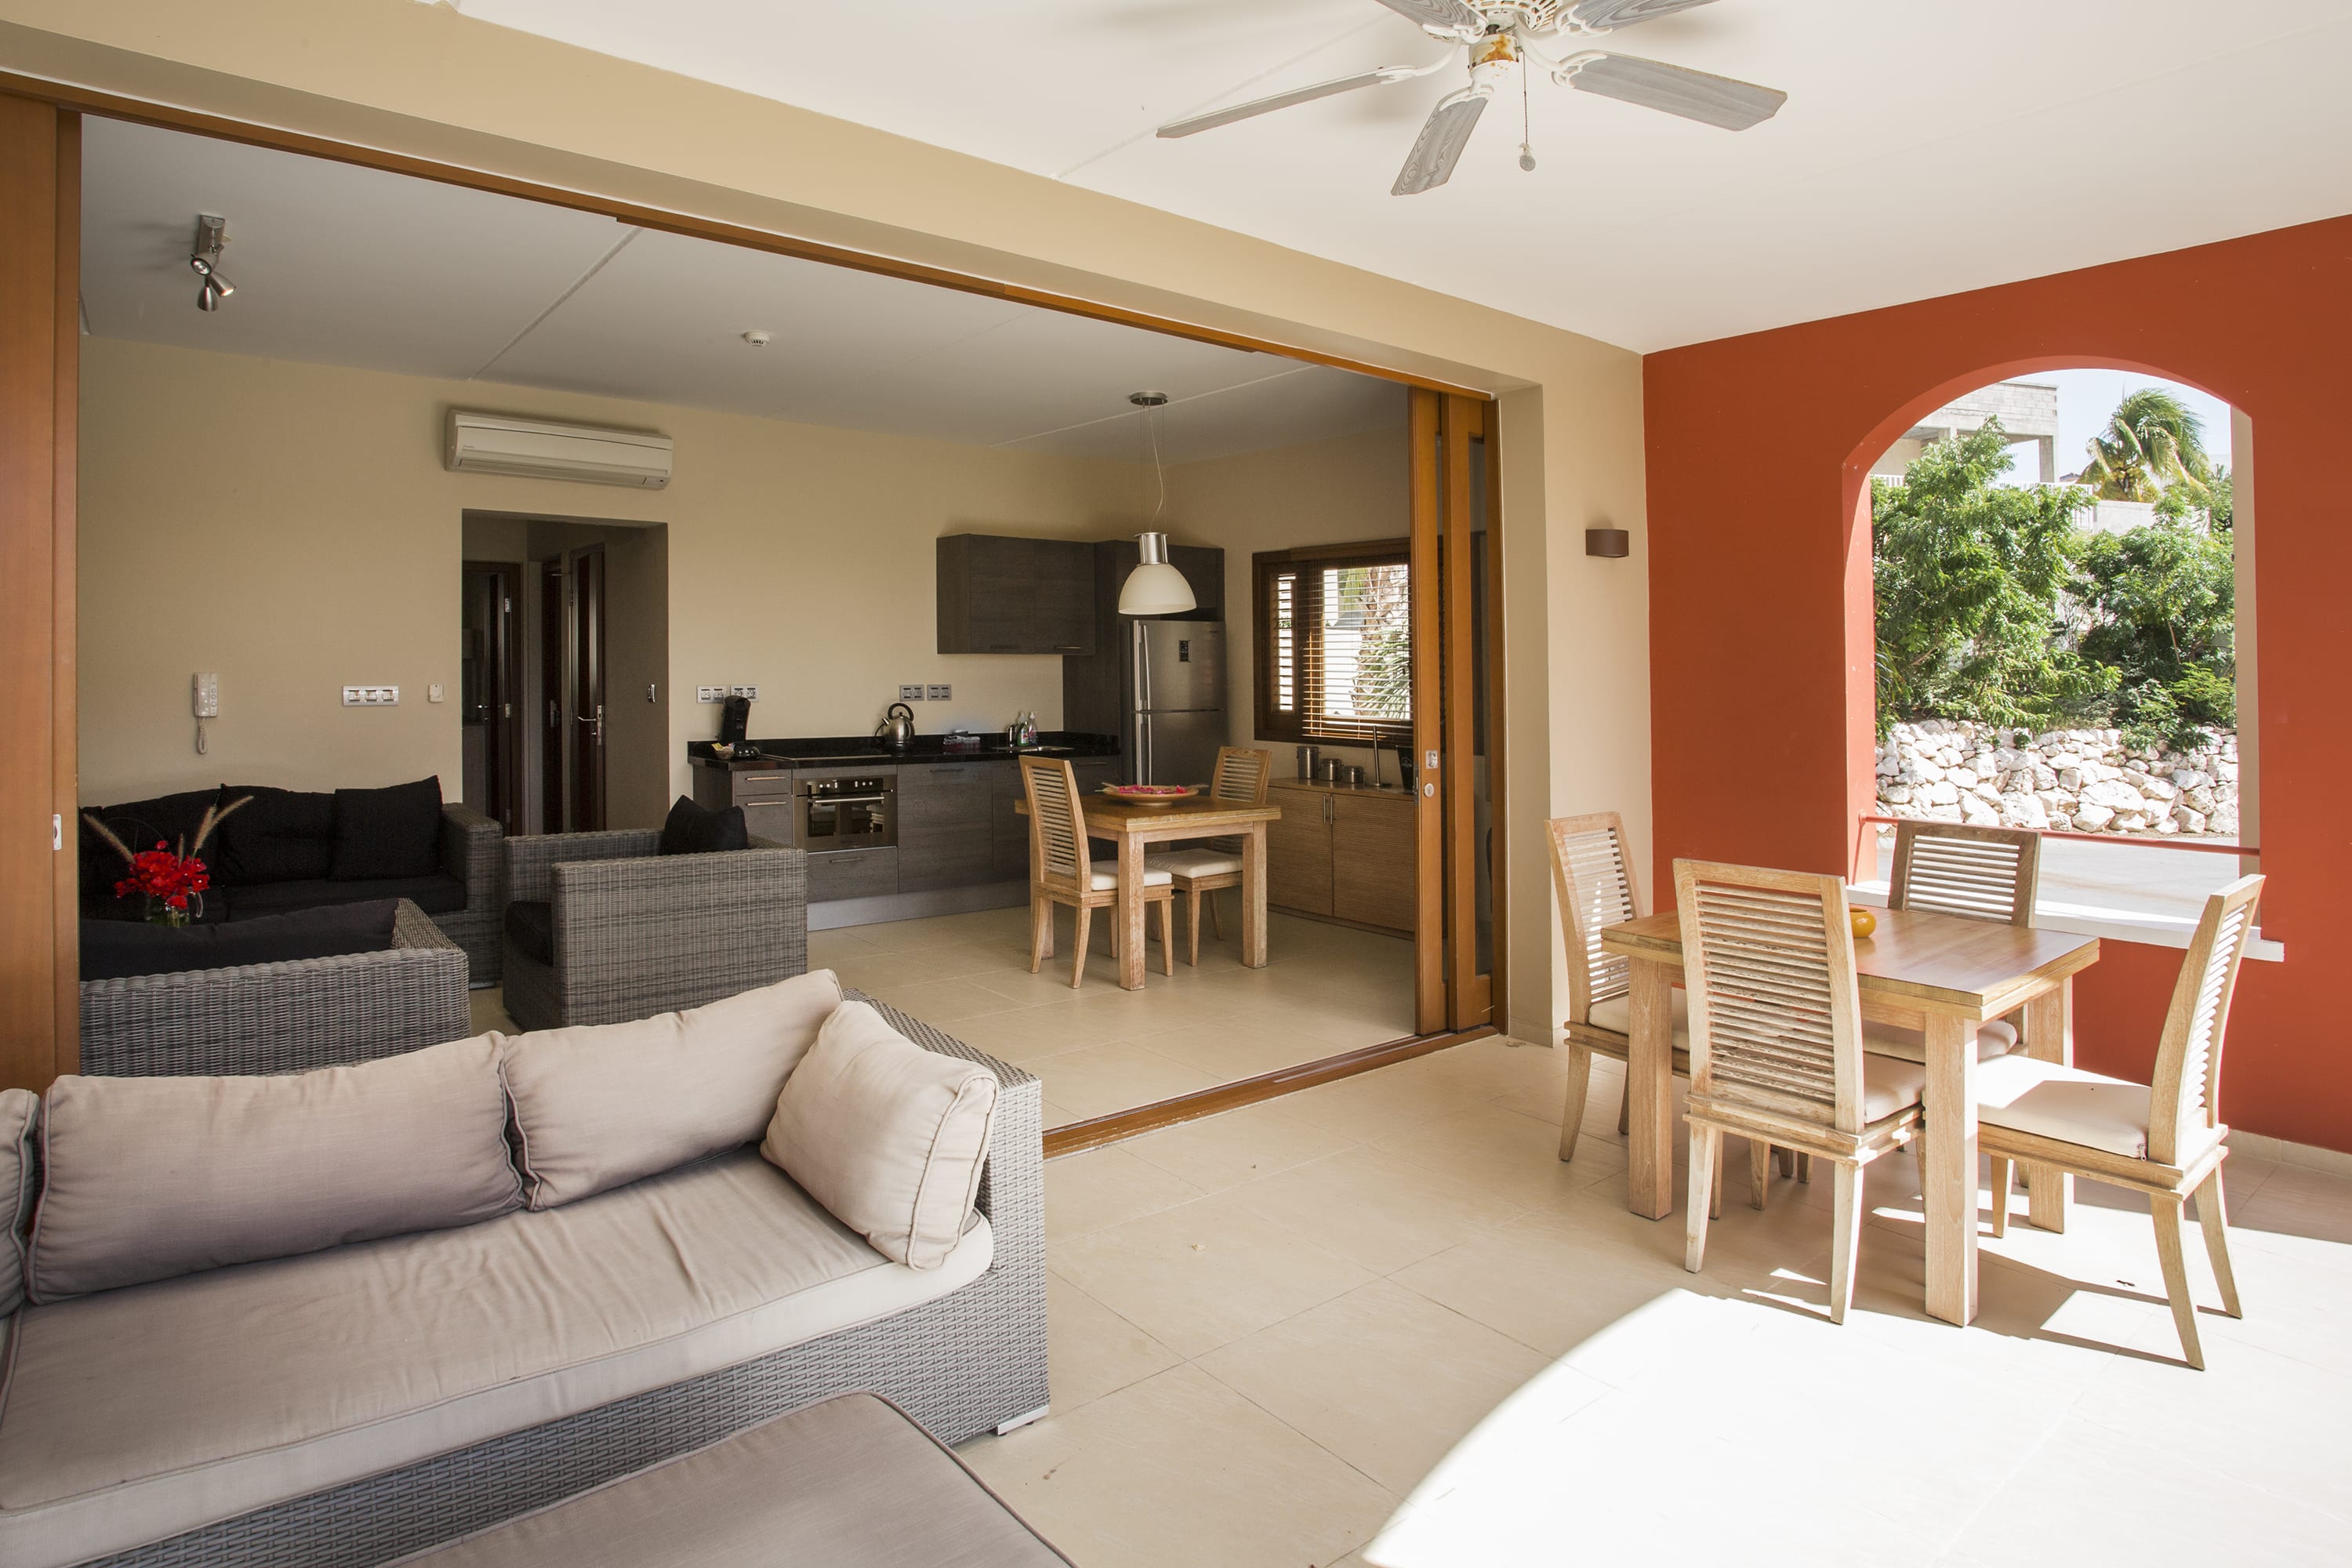 Property Image 1 - Wonderful Modern Apartment with Tropical Garden and Patio